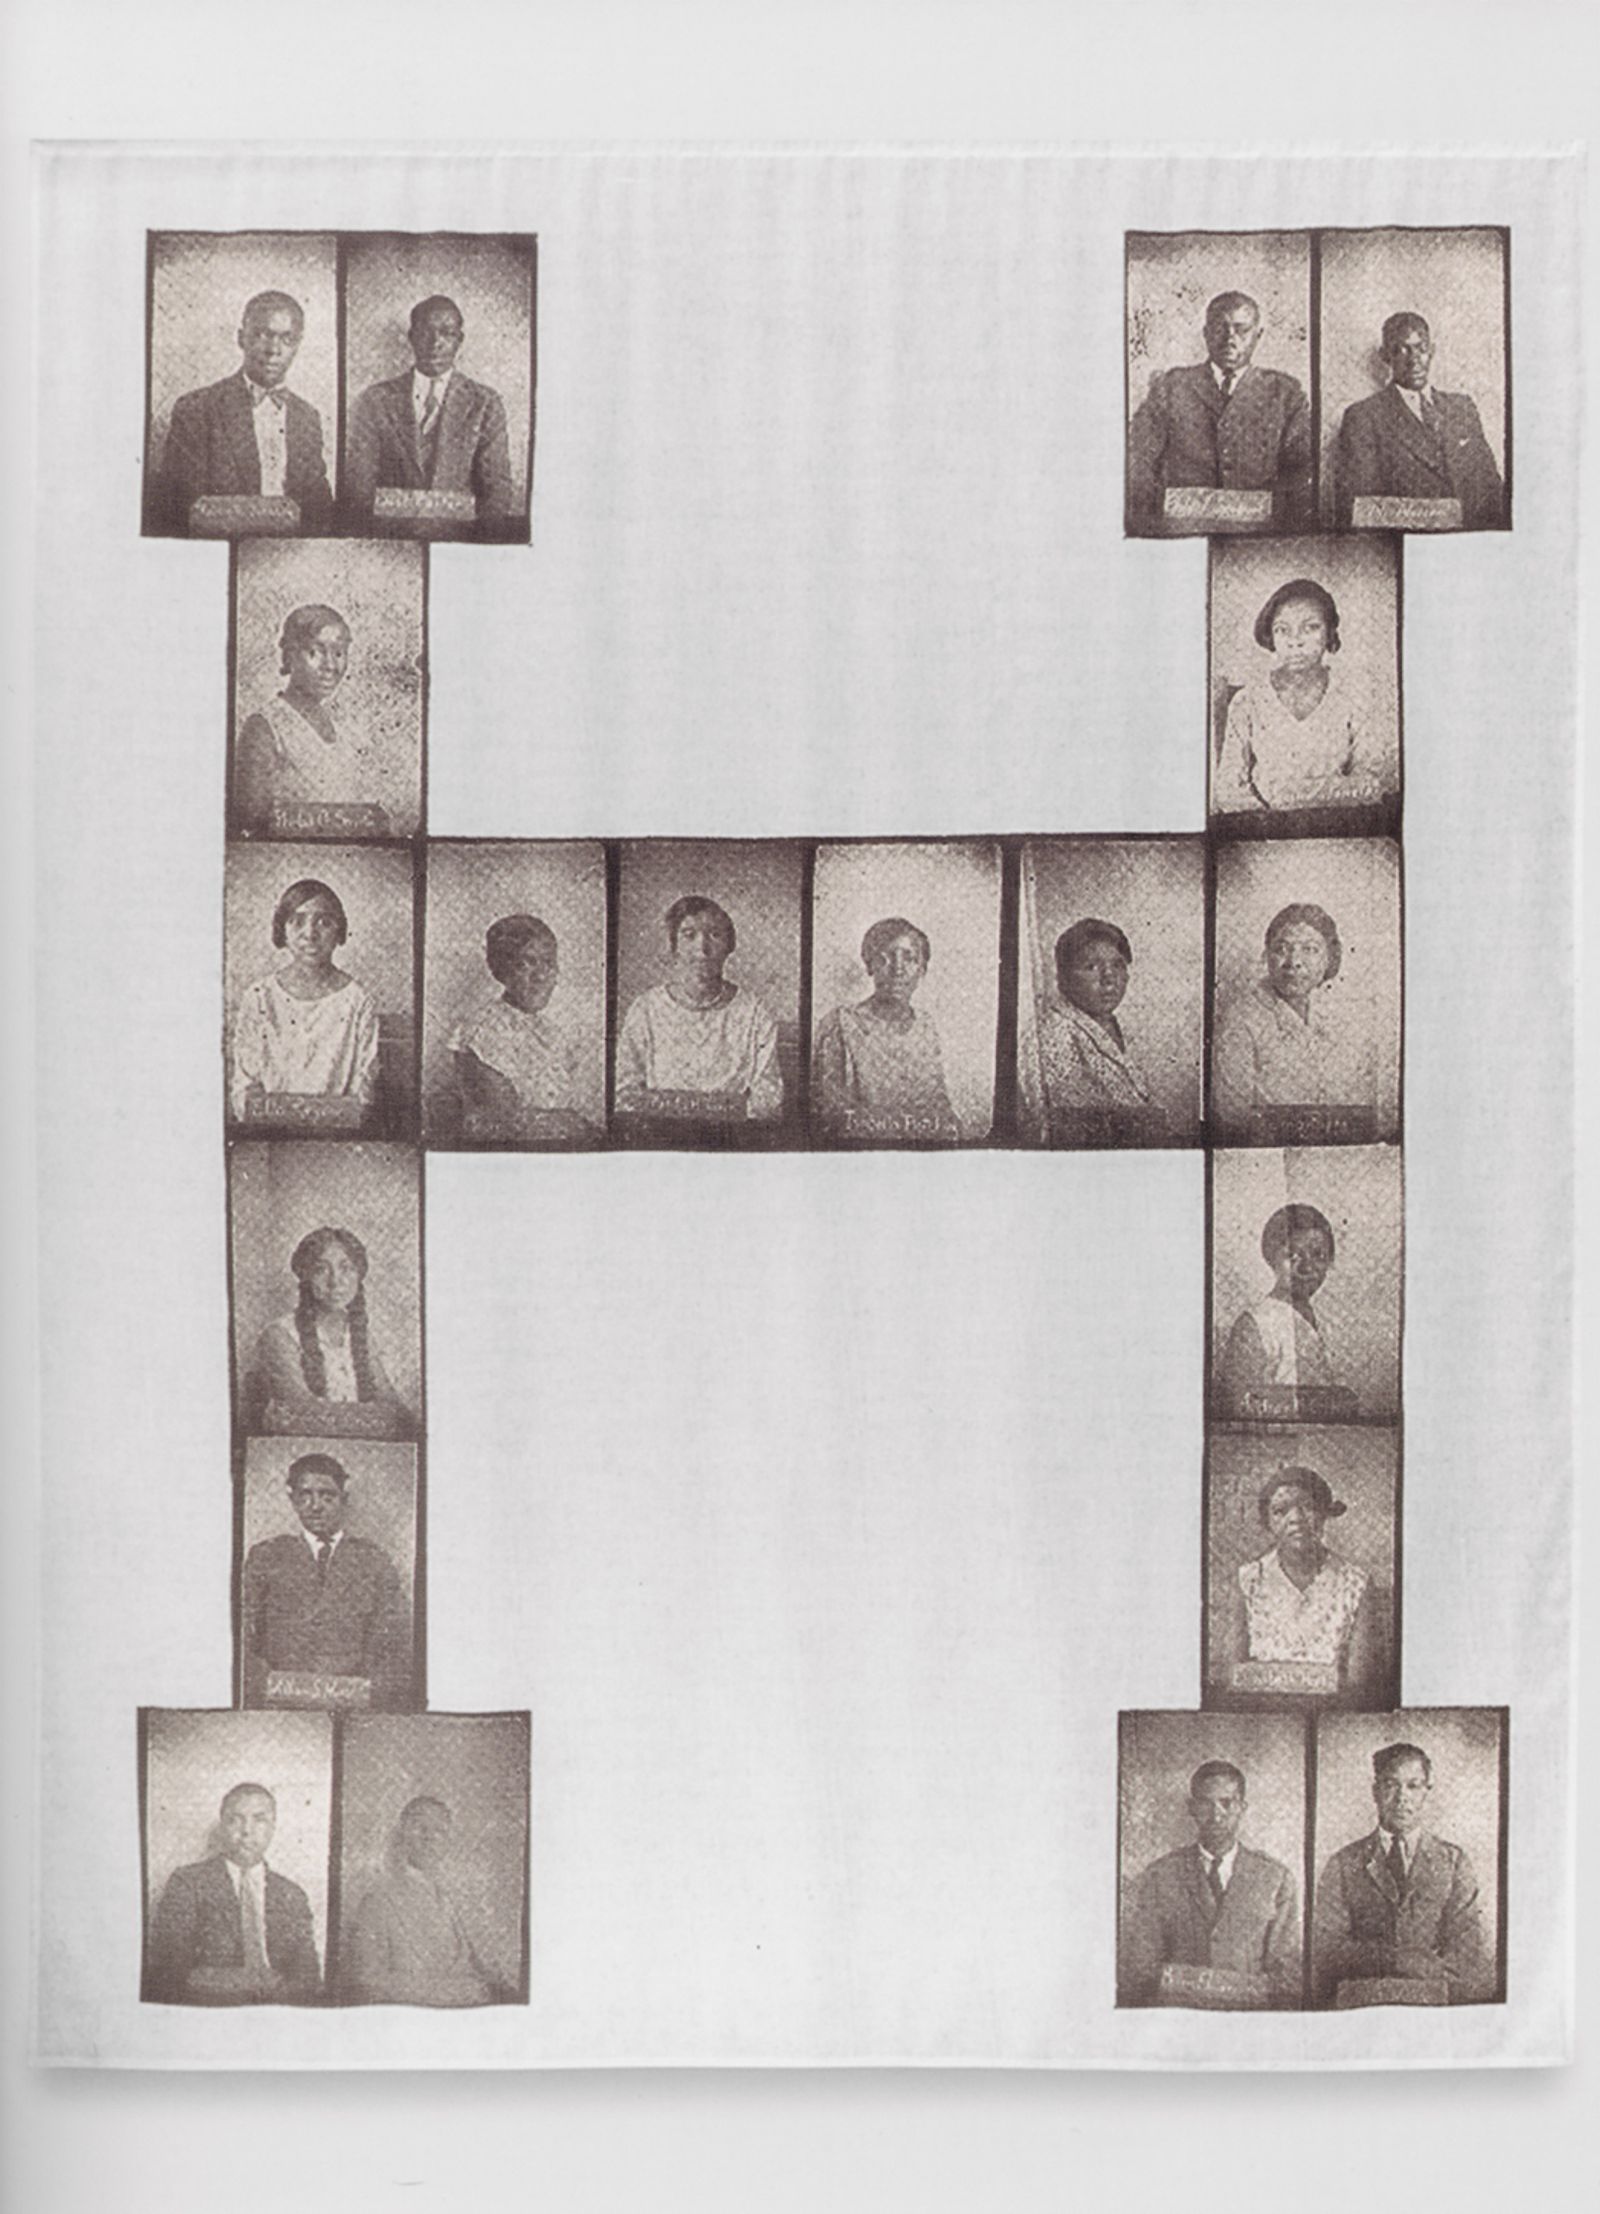 Courtesy the artist and Jack Shainman Gallery, New York. © Carrie Mae Weems Hampton Yearbook, 2000